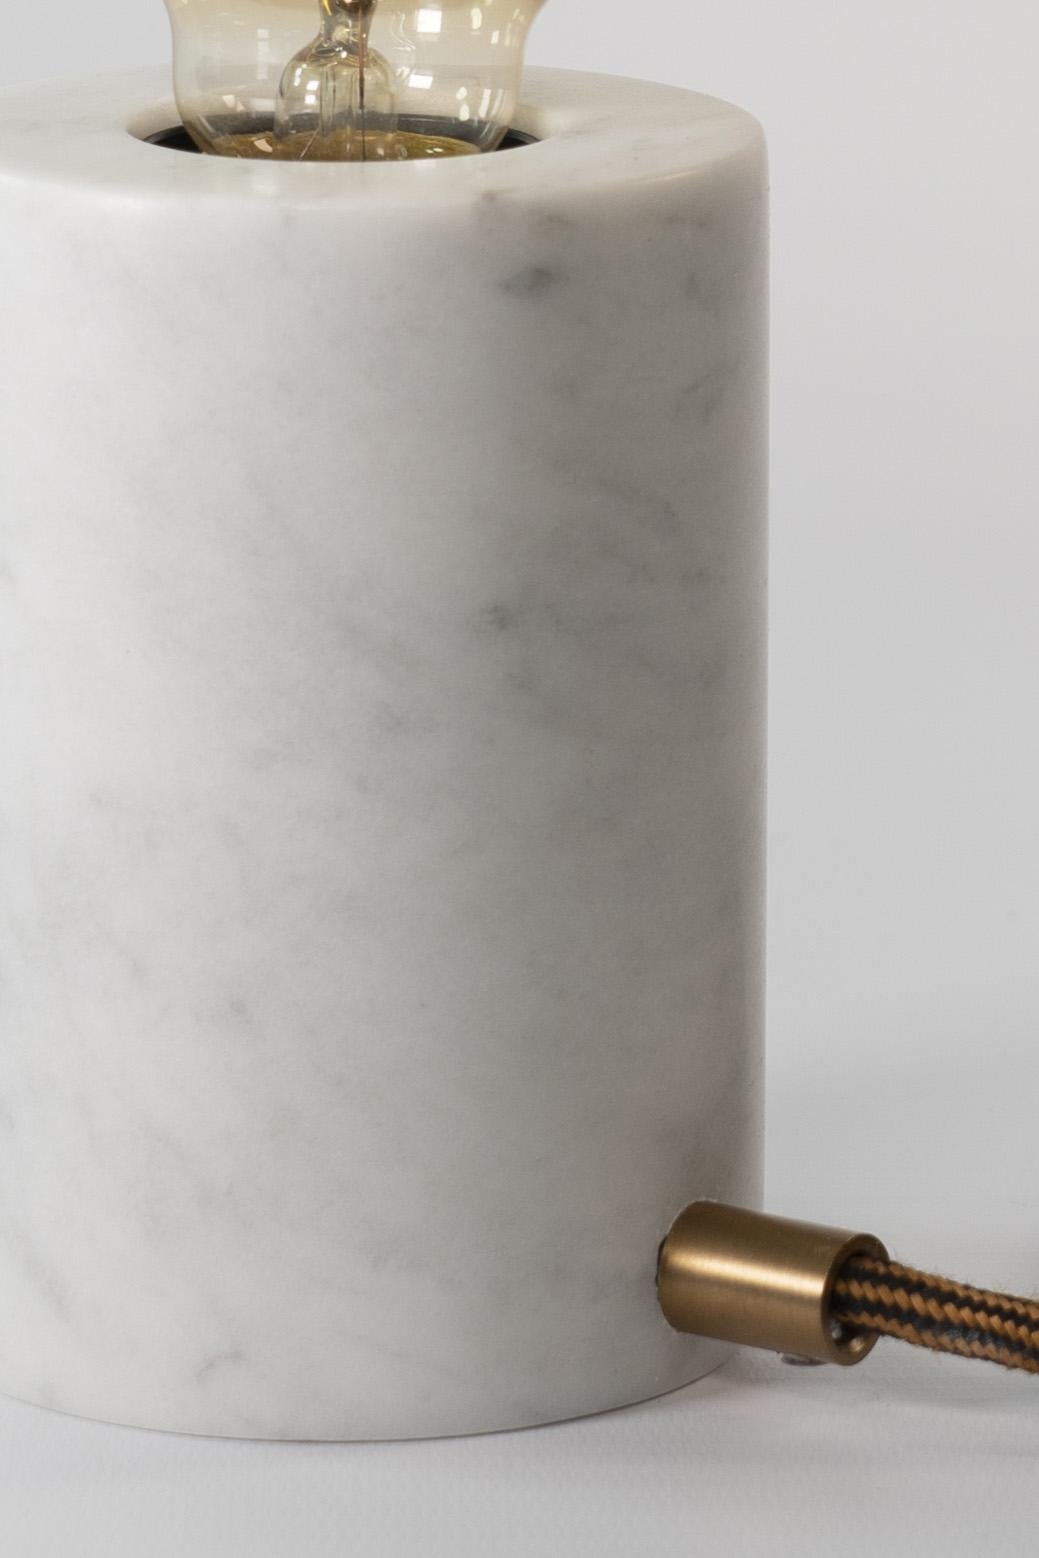 Defined by a balanced cylindrical silhouette, this modern table lamp is expertly handcrafted in Calacatta marble with a matte finish.

The piece is completed with an extra large LED bulb that enhances the elegance and uniqueness of the lamp.